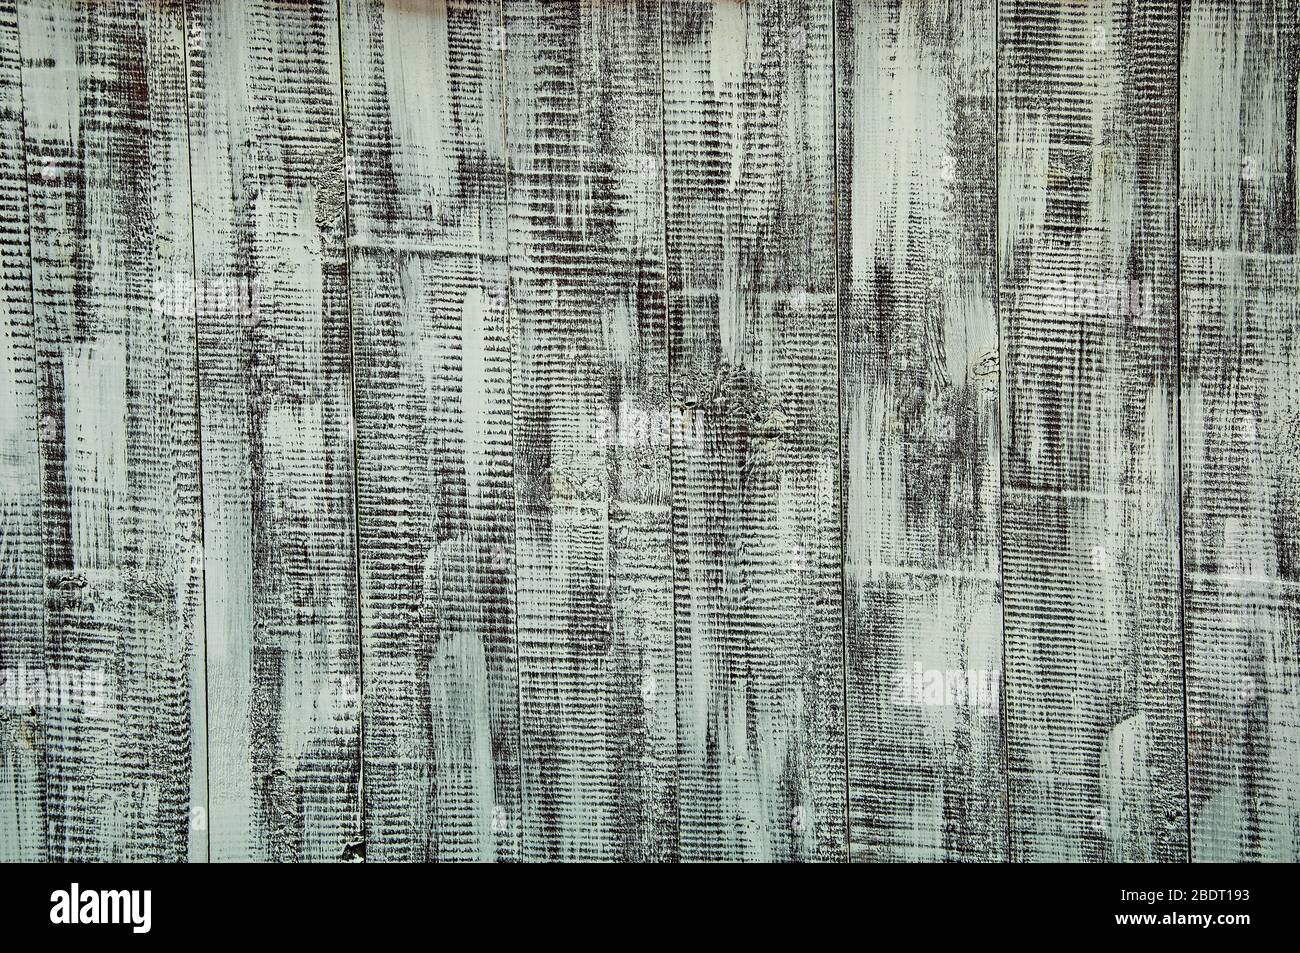 Wood texture. The background is black and white with a hint of turquoise. Stock Photo